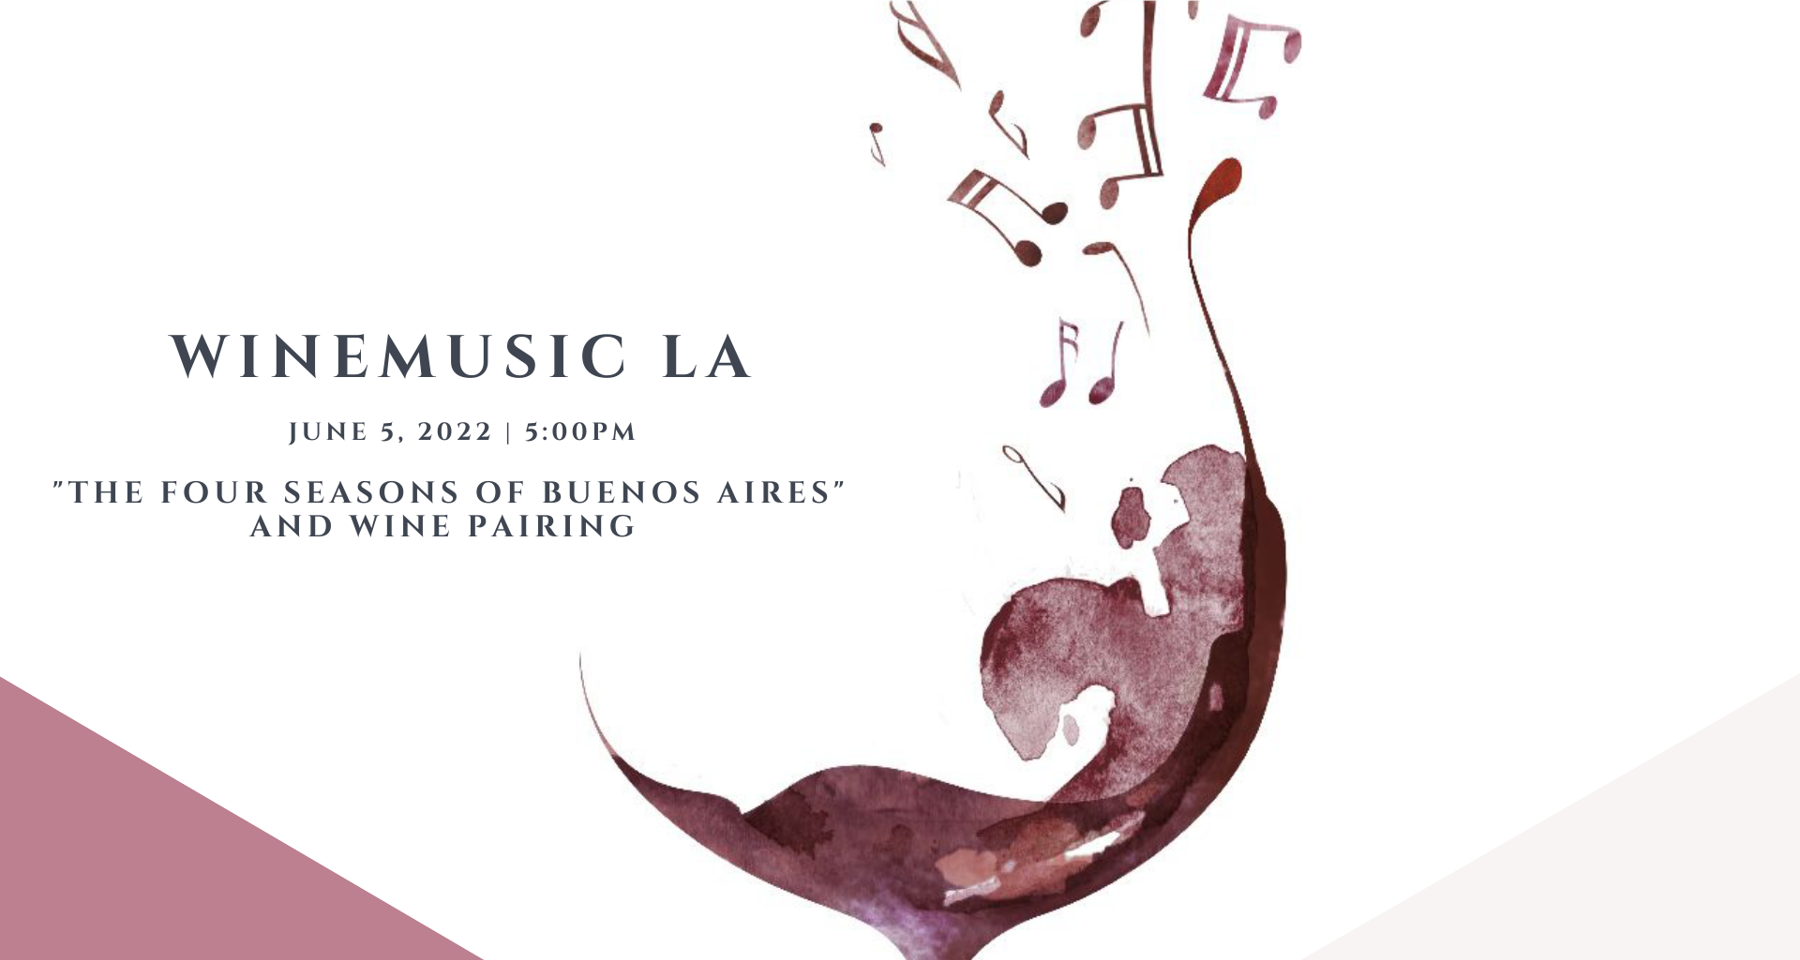 SEASON FINALE! WineMusic LA presents "The Four Seasons of Buenos Aires" and Wine Pairing